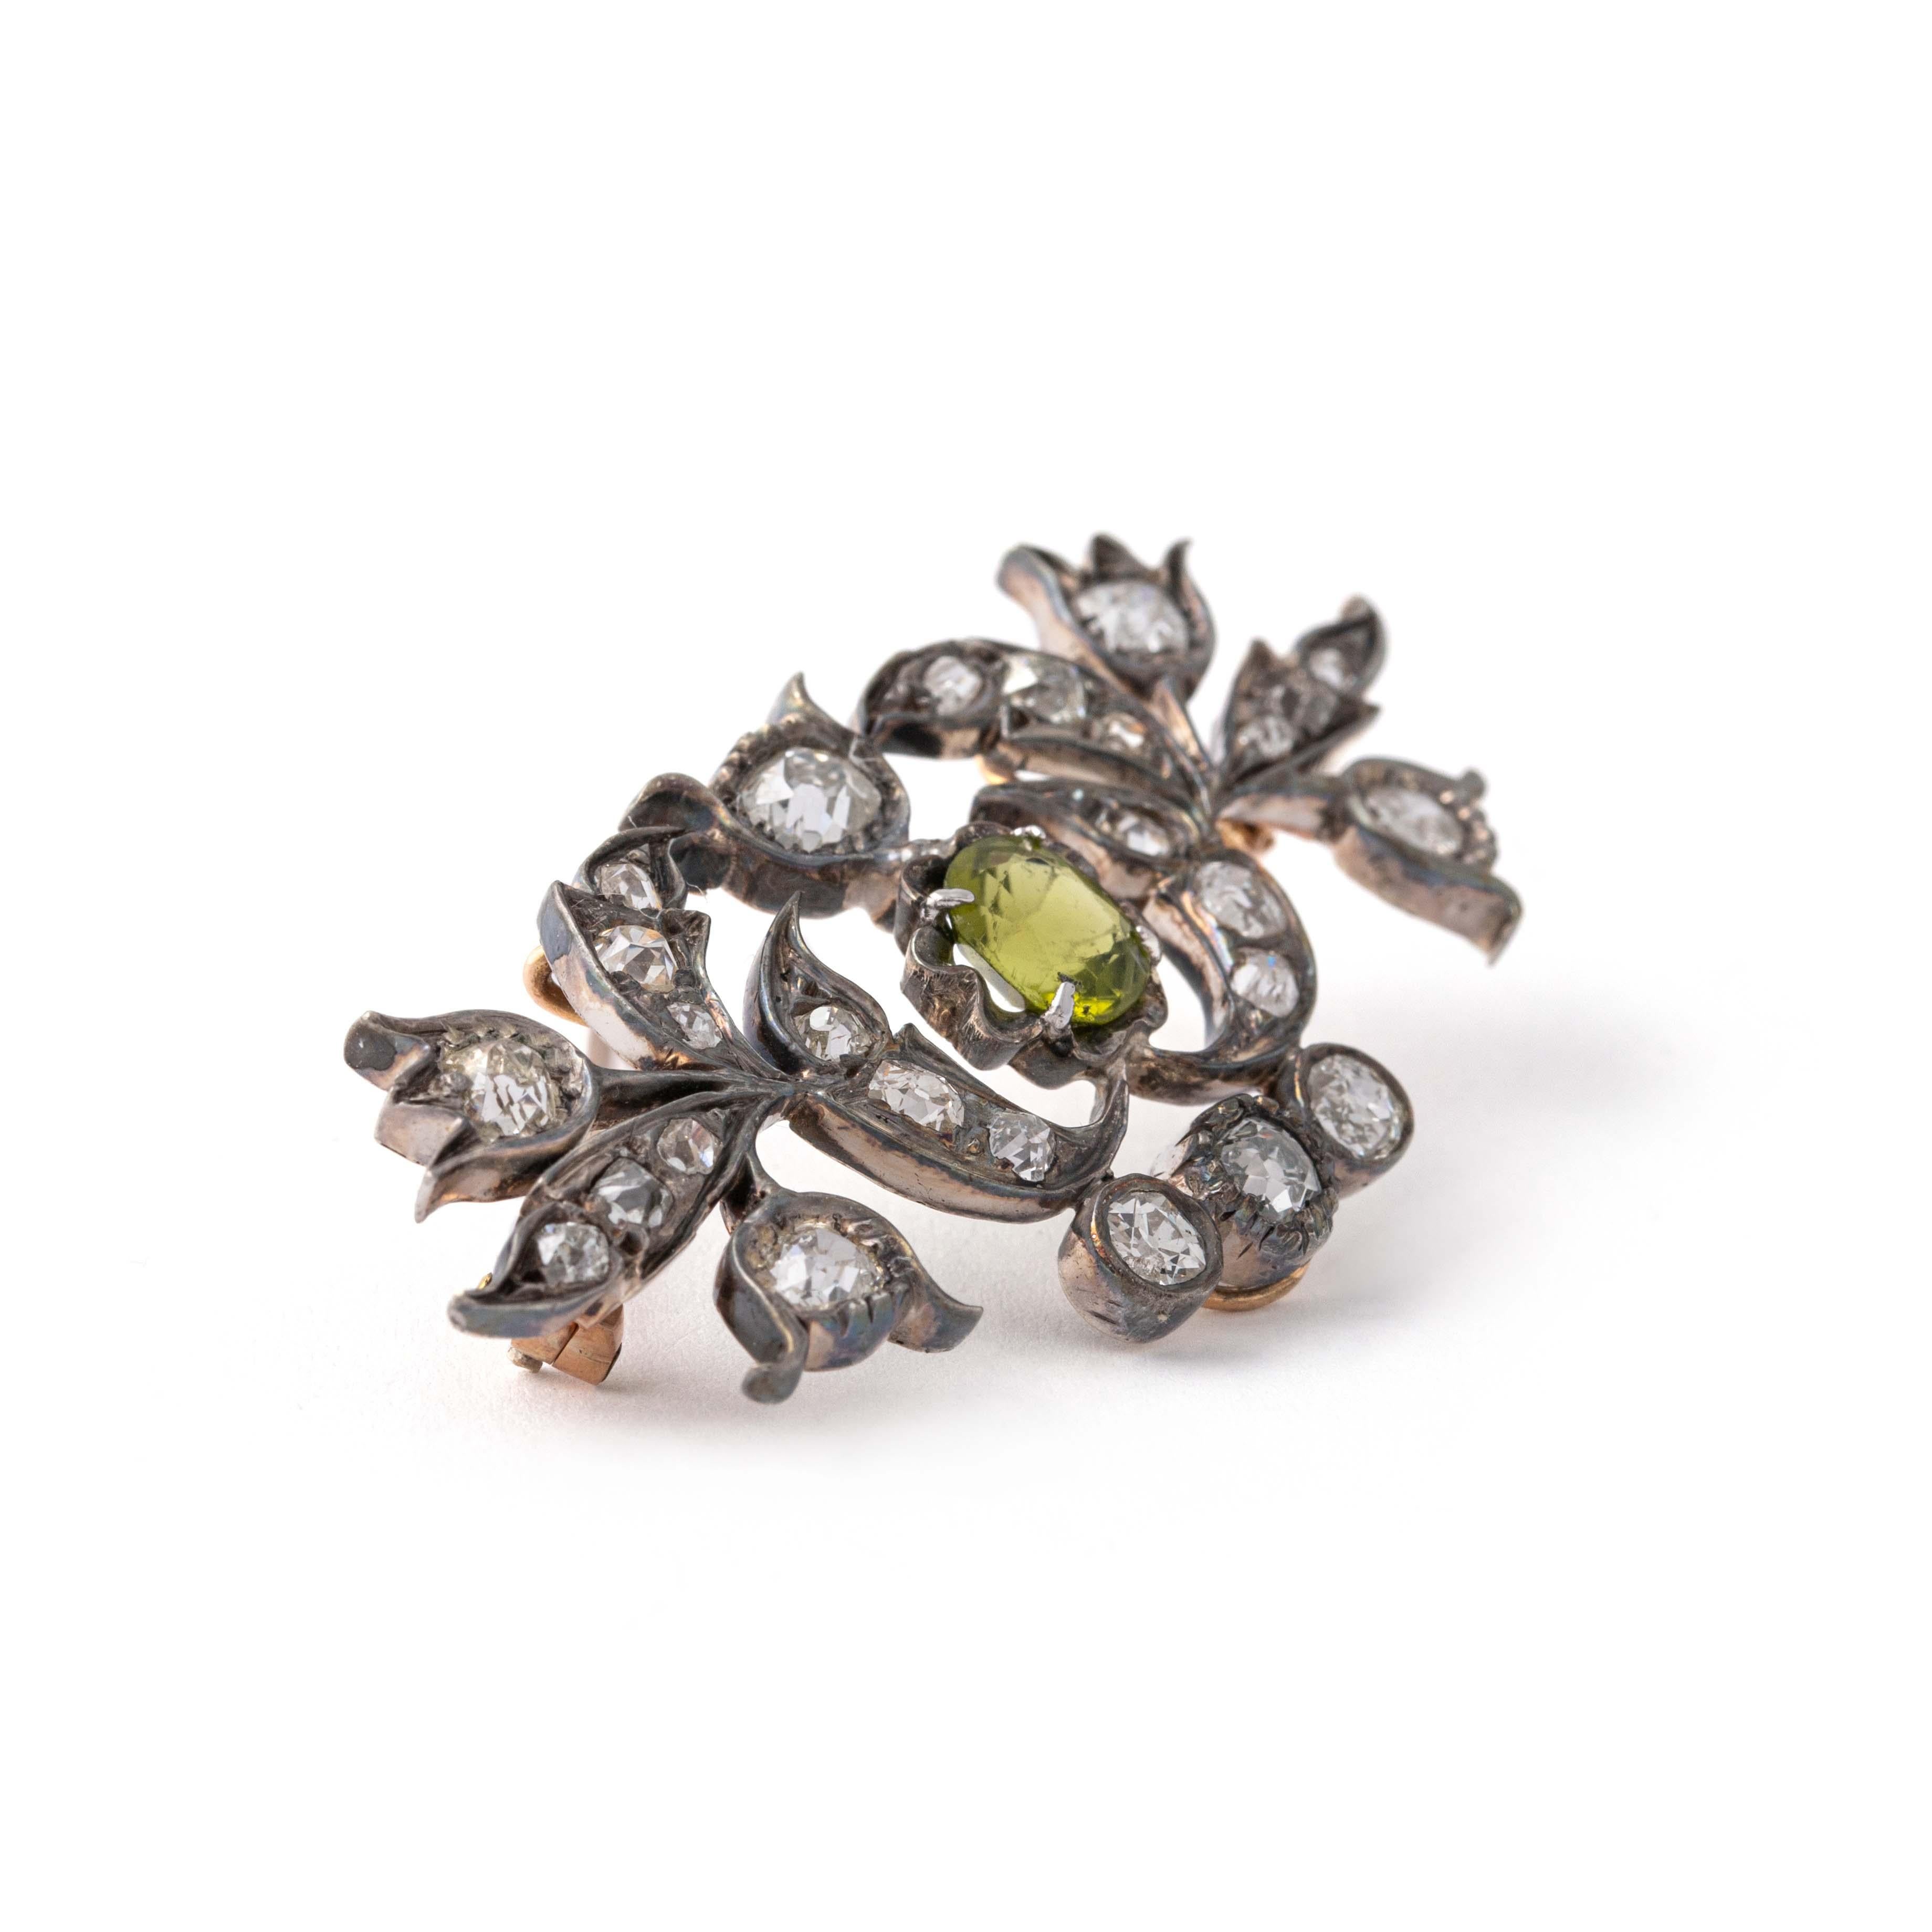 Women's or Men's Antique Diamond and Peridot Brooch Pendant Late 19th Century For Sale